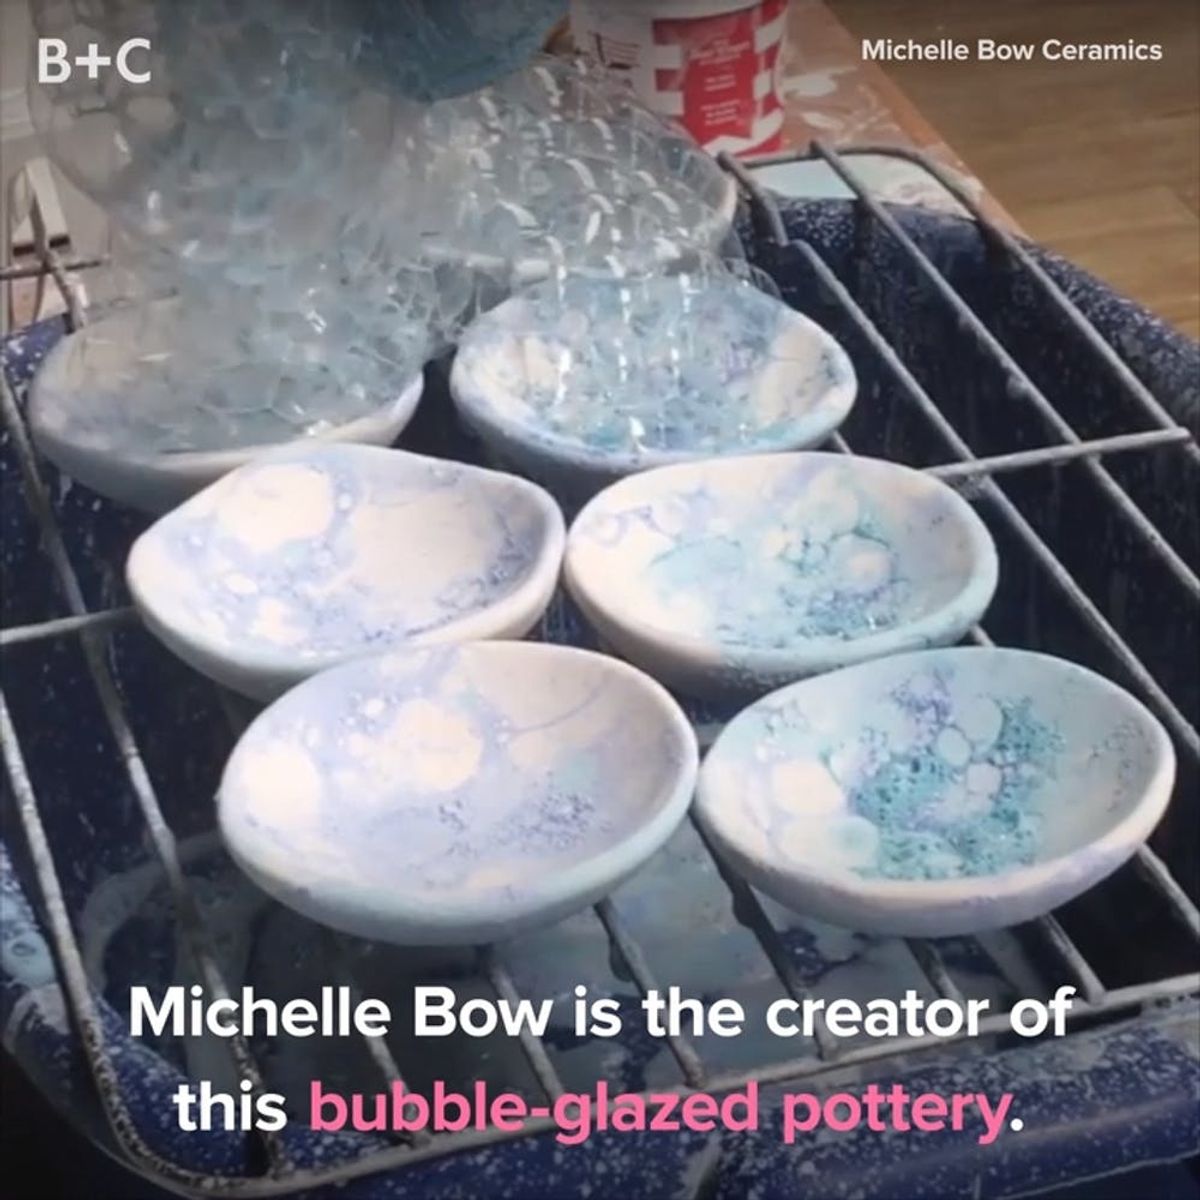 This Artist Takes Bubble Art To the Next Level